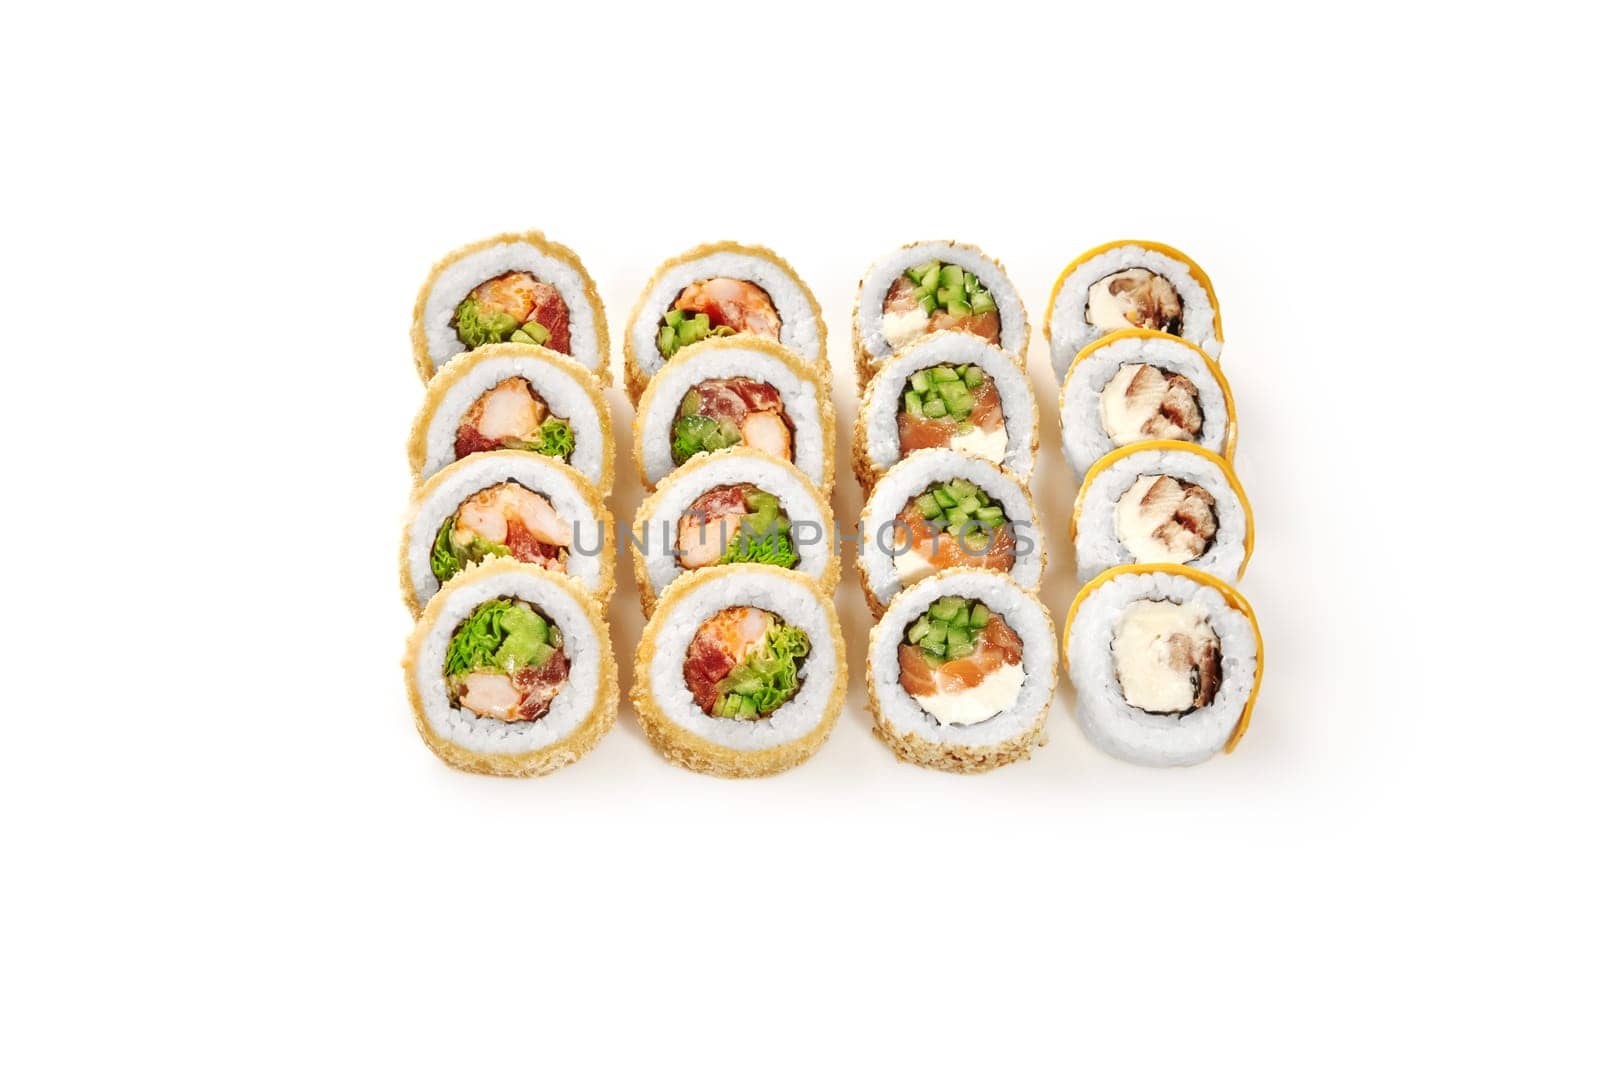 Crispy tempura with crab and tobiko, sesame covered salmon rolls and unagi uramaki topped with sweet mango neatly arranged isolated on white background. Japanese culinary traditions